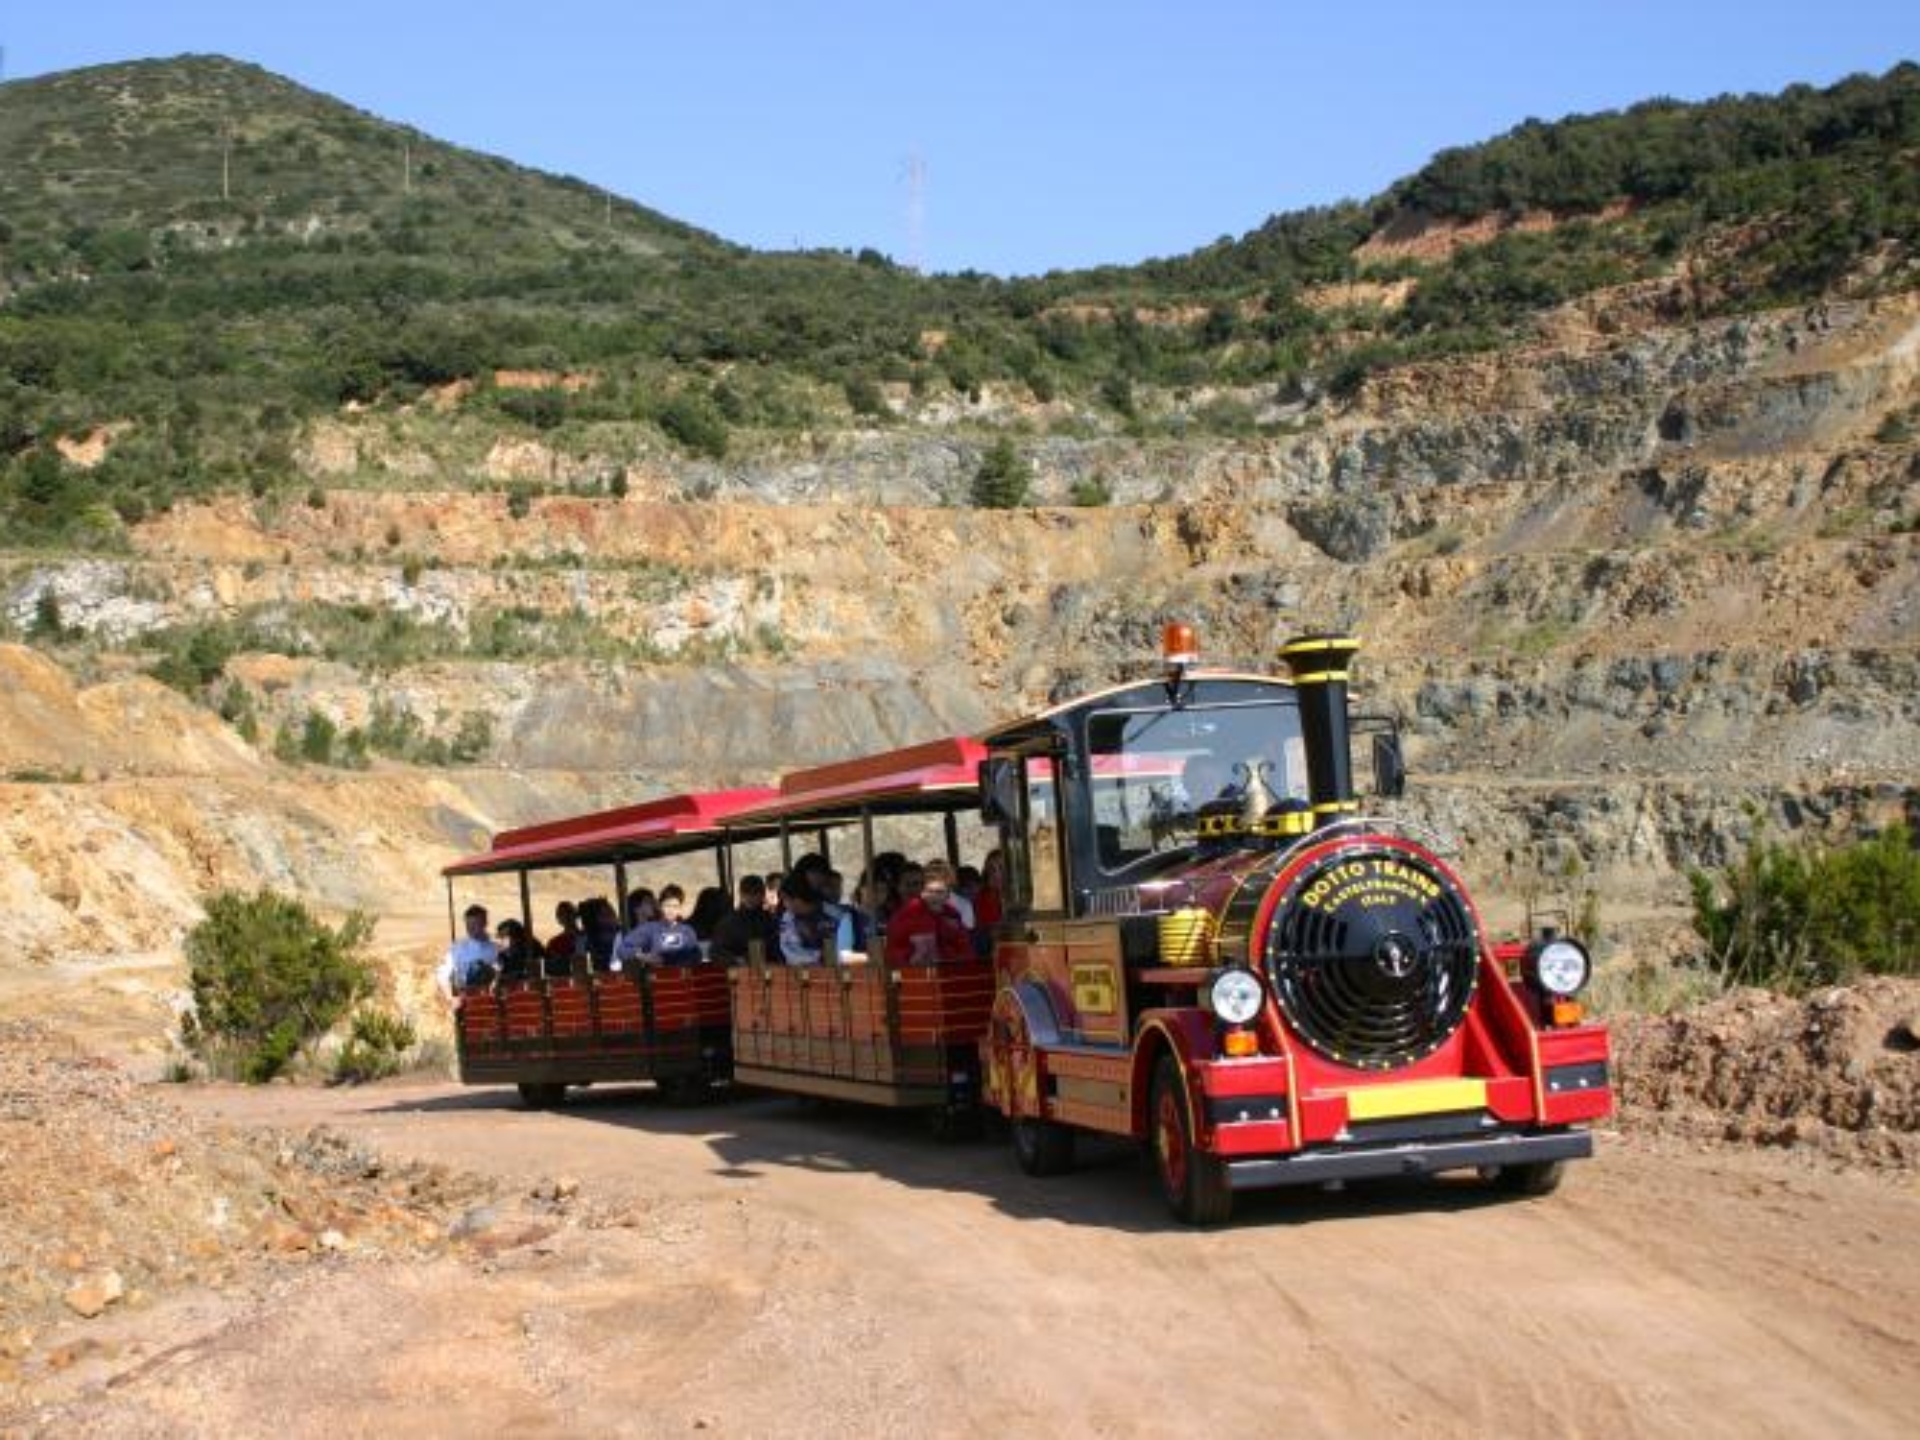 The little red train in the mines